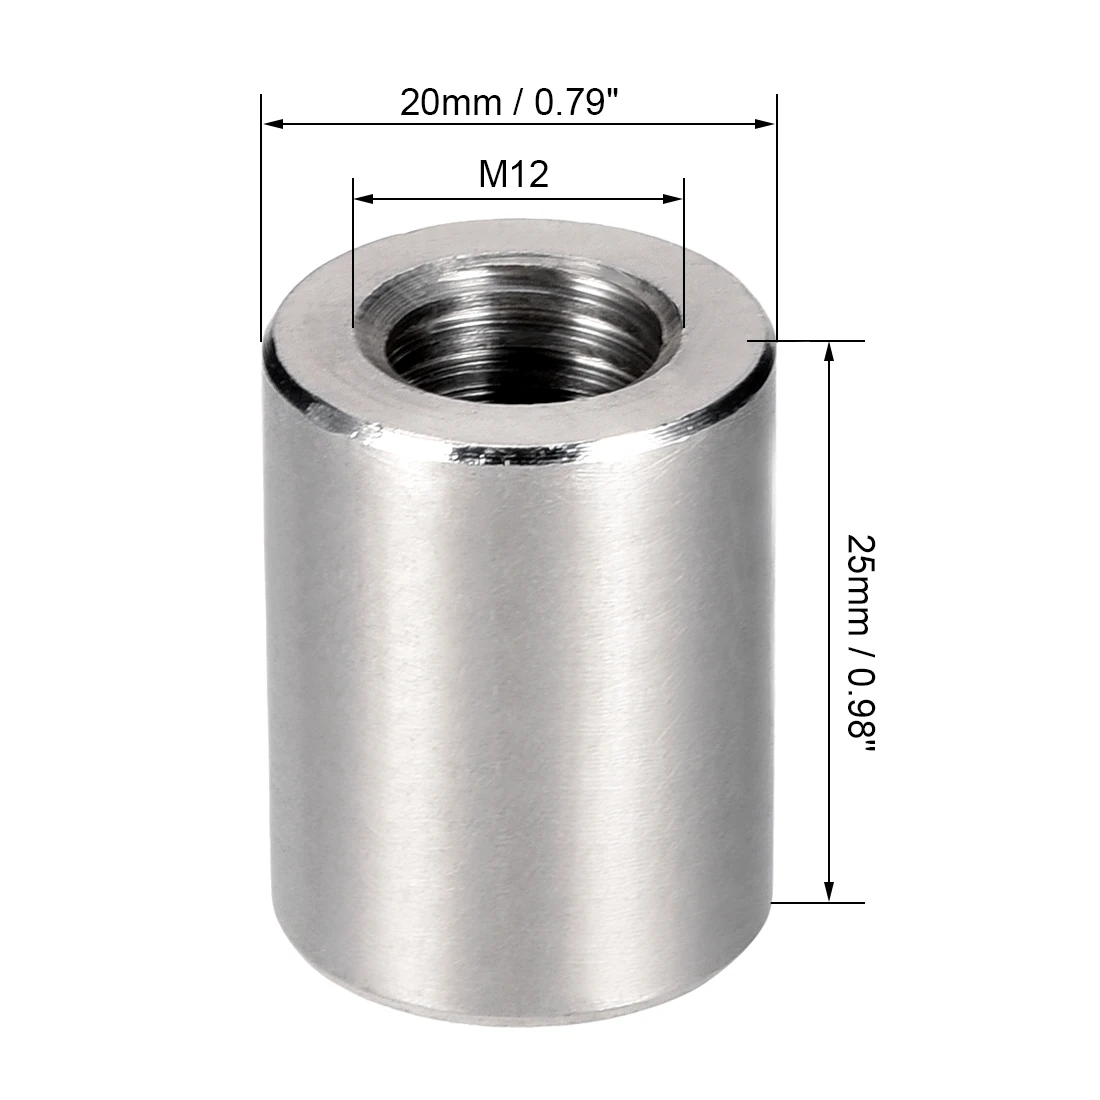 Threaded Sleeve Rod Bar Stud Round Connector Long Nuts M6,8,10,12 Zinc Plated 